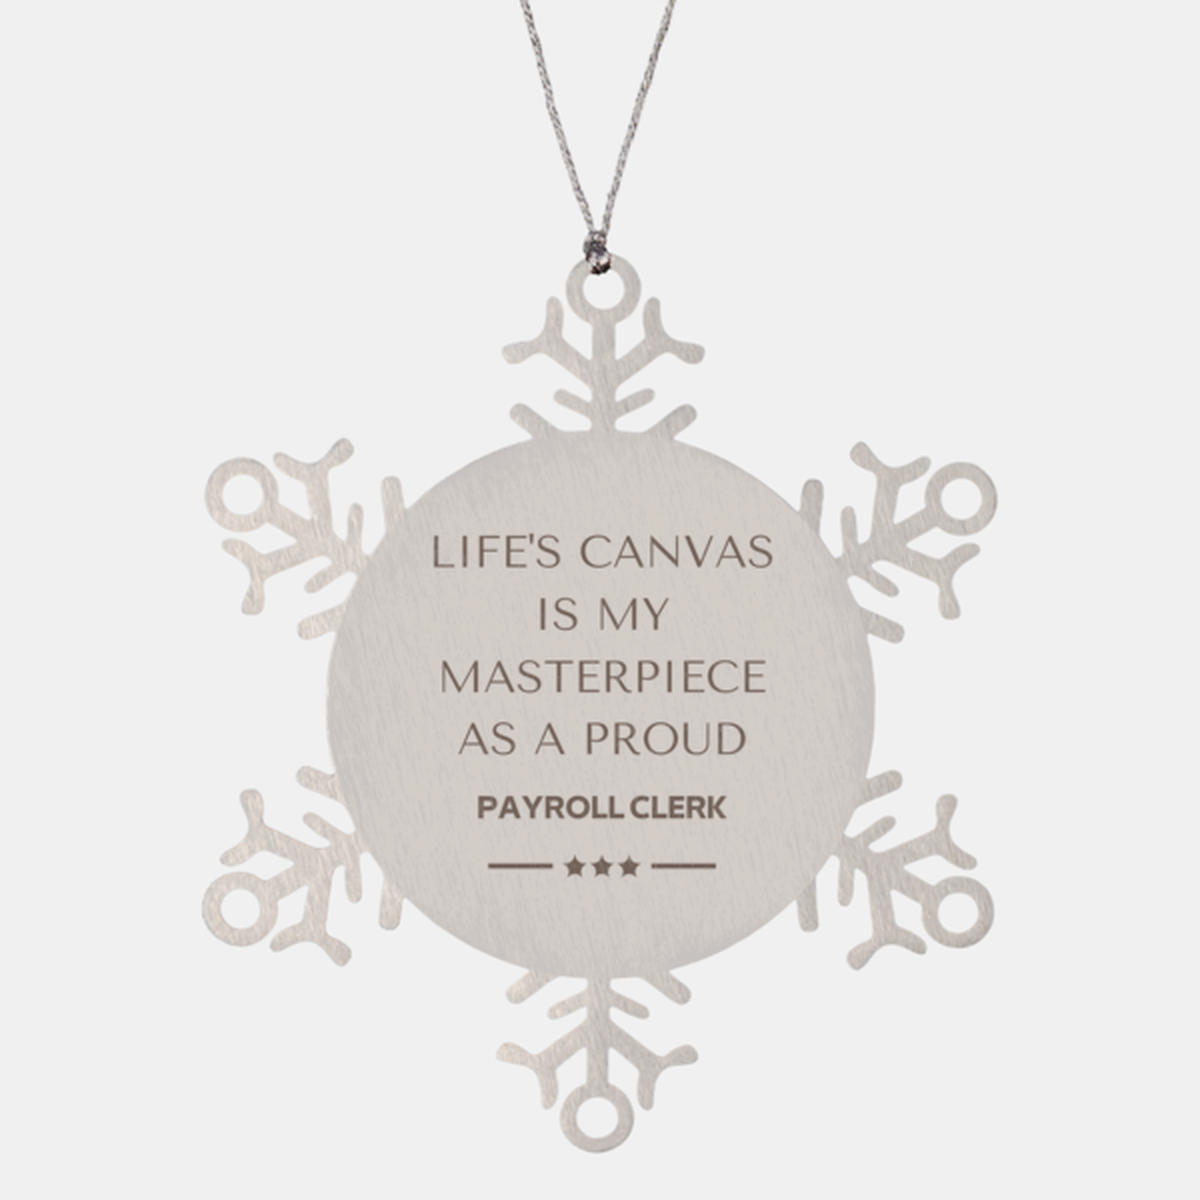 Proud Payroll Clerk Gifts, Life's canvas is my masterpiece, Epic Birthday Christmas Unique Snowflake Ornament For Payroll Clerk, Coworkers, Men, Women, Friends